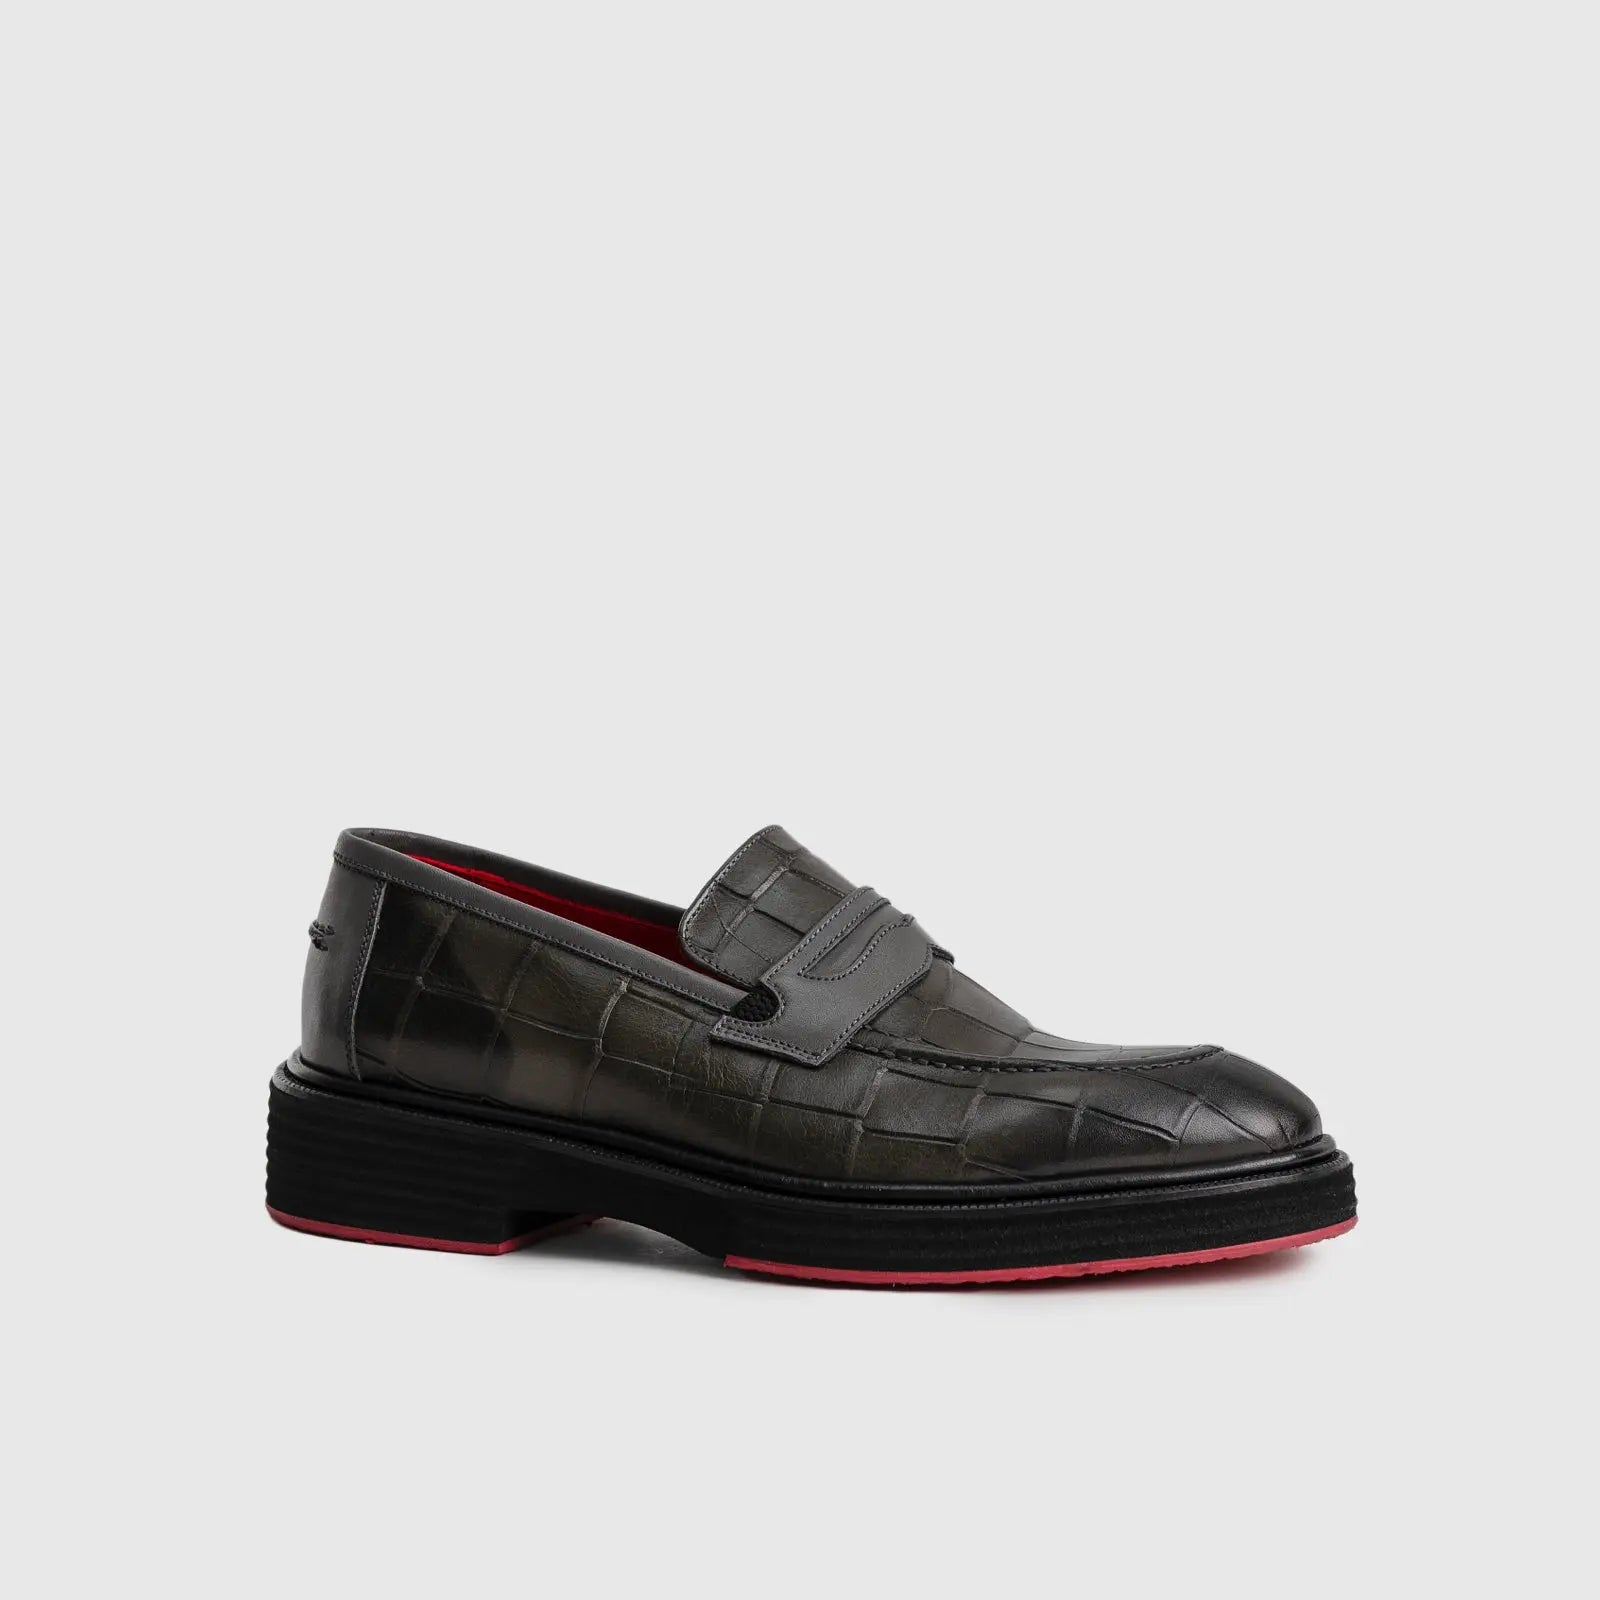 Chunky Sole Dress Loafers 0236 Oxfords | familyshoecentre